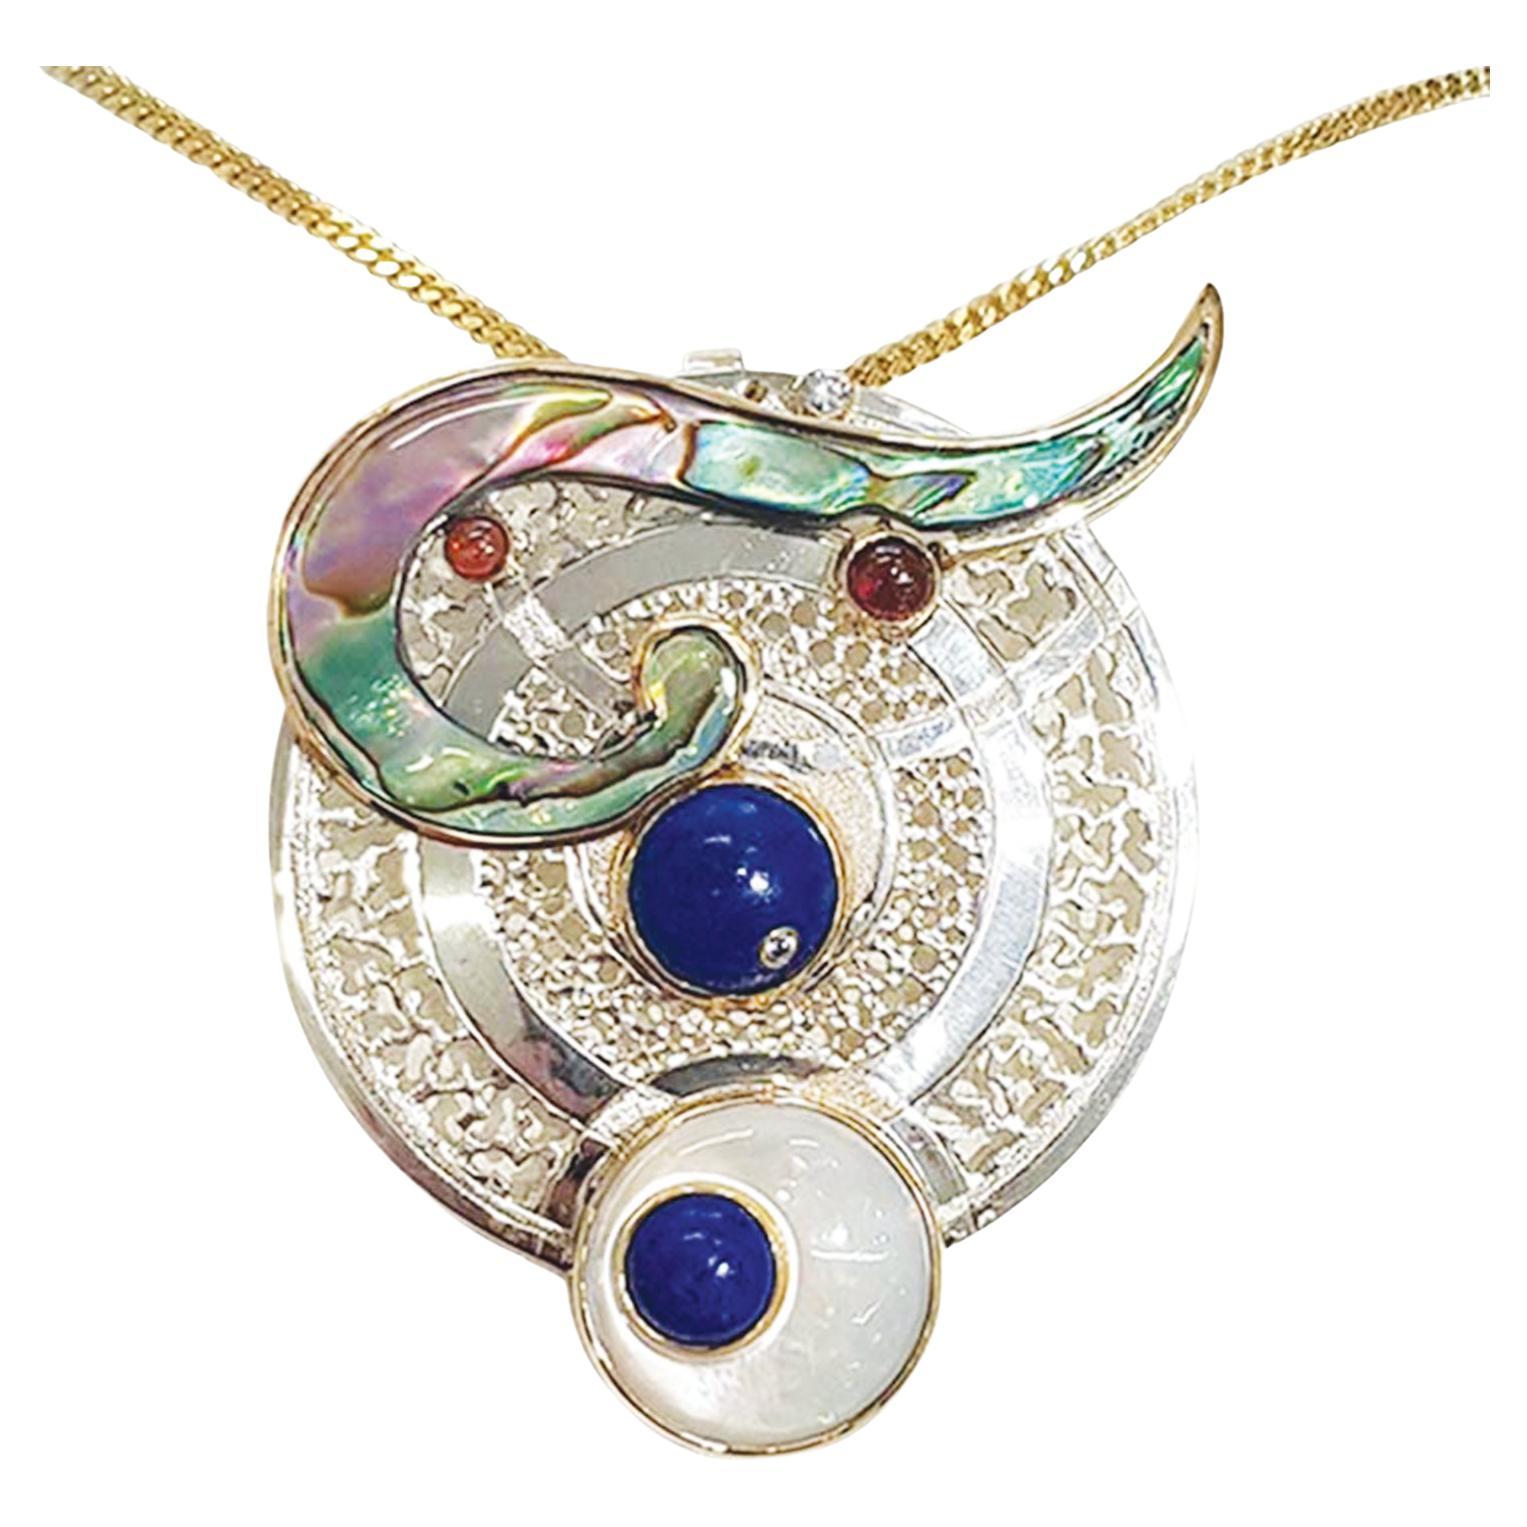 Paul Amey "Constellation" Pendant in Sterling Silver and 9K Gold and Lapis For Sale